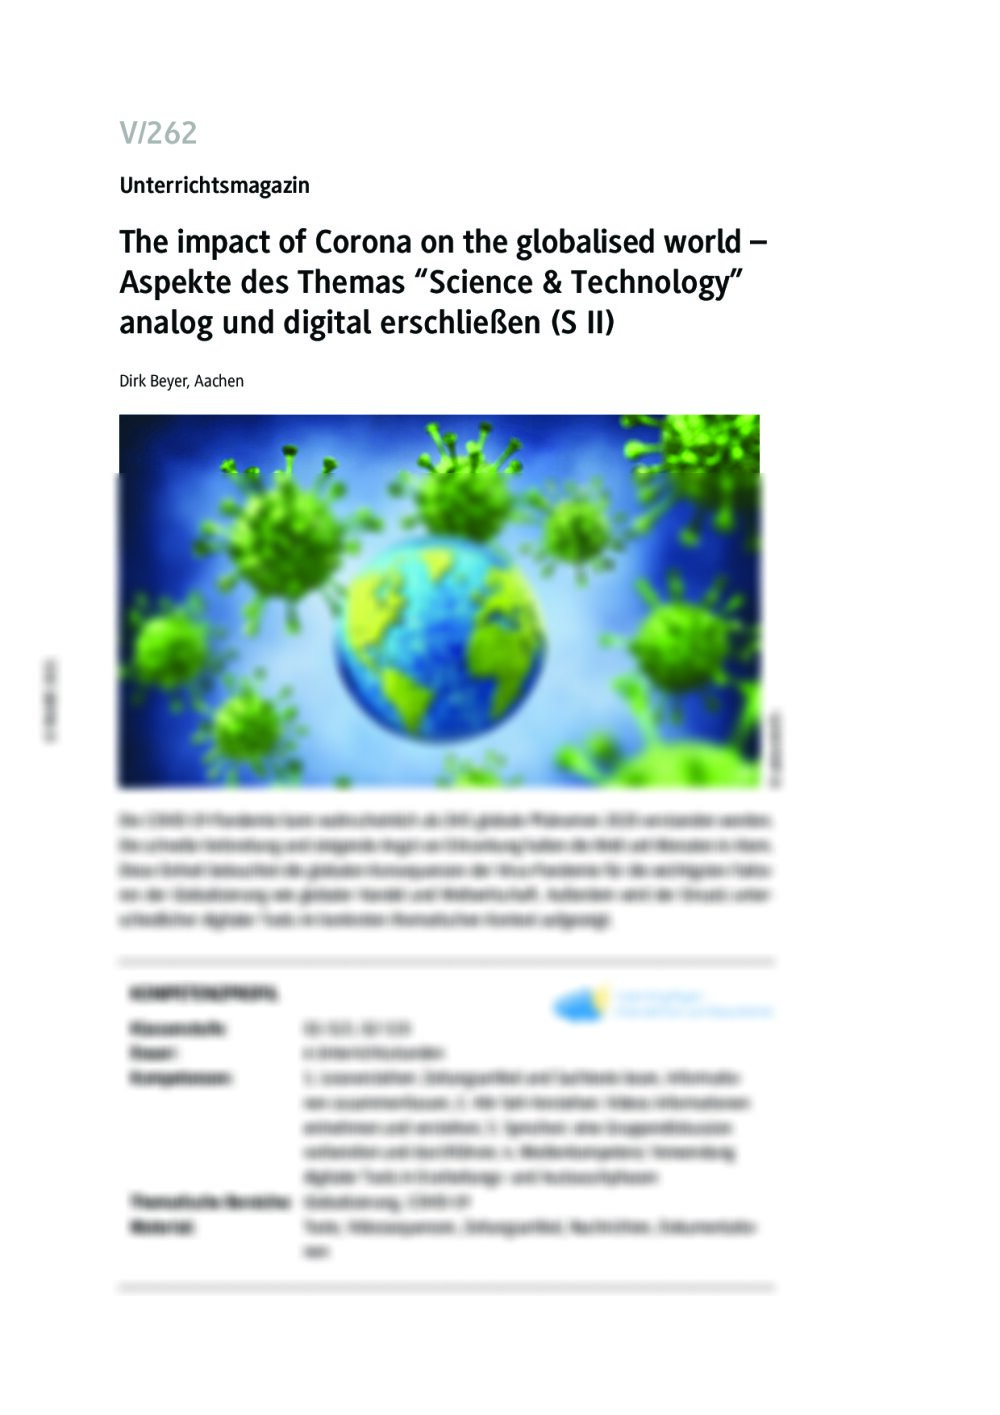 The impact of Corona on the globalised world - Seite 1